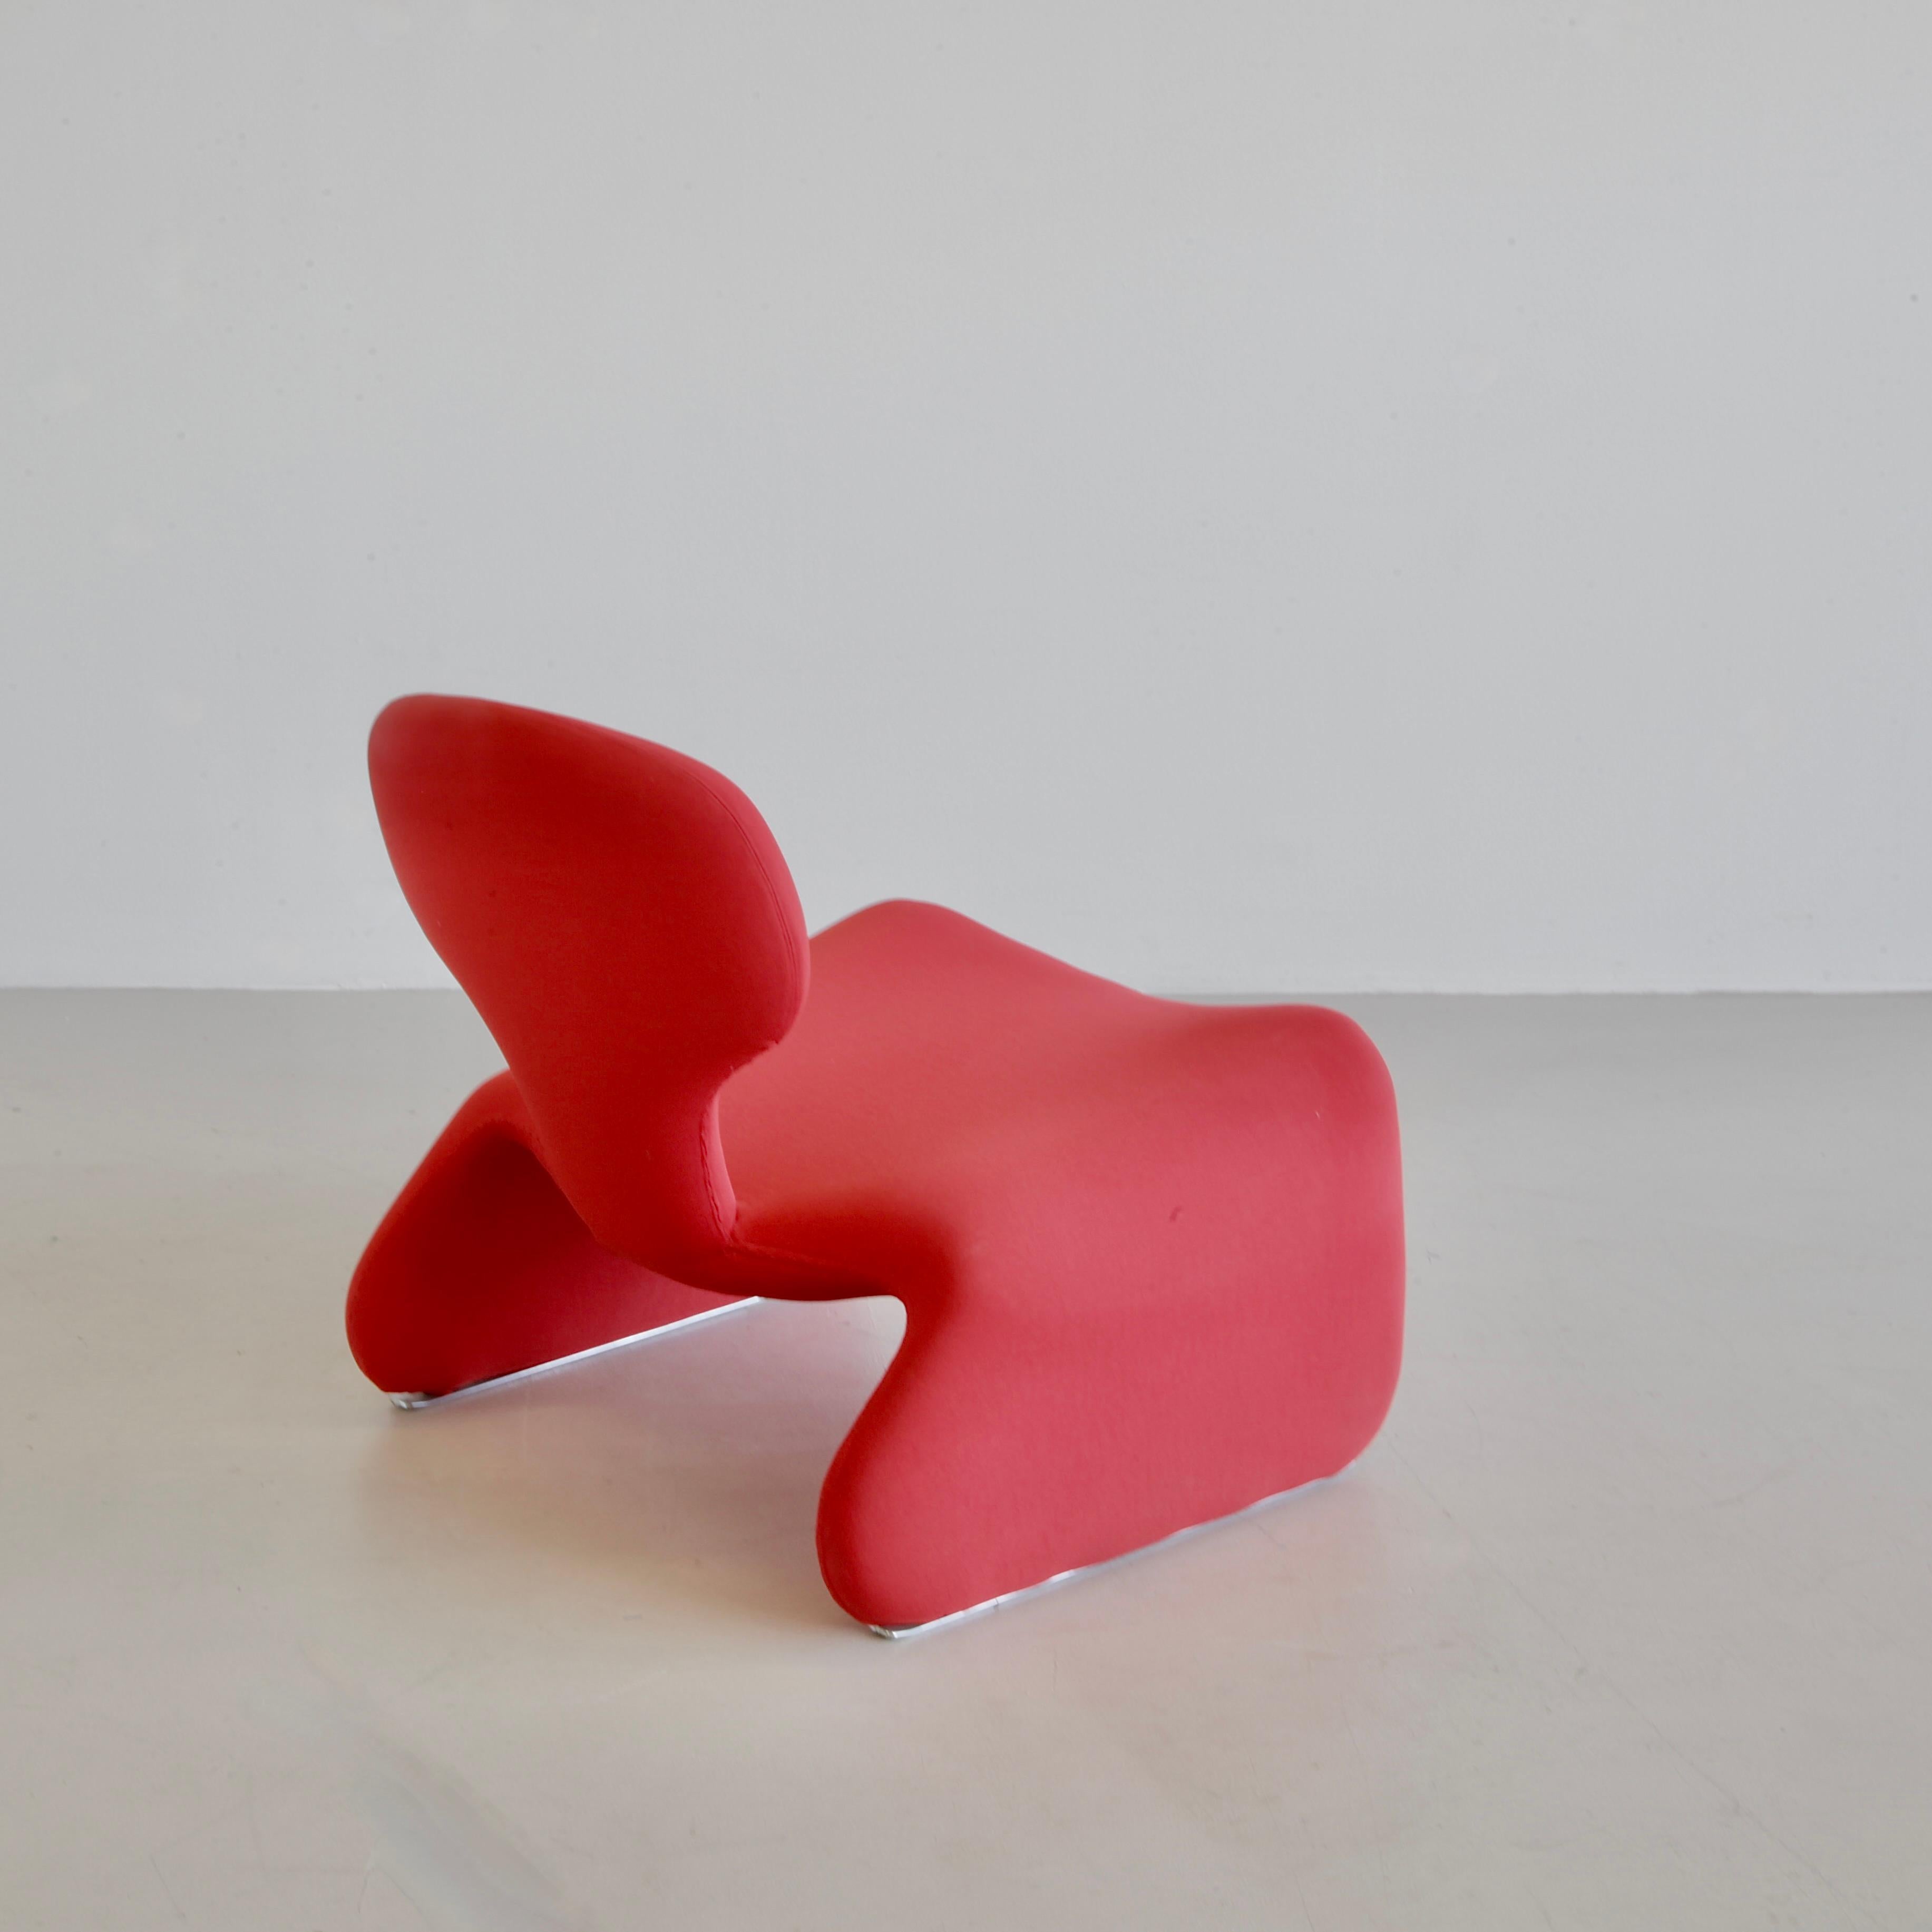 Organic Modern Dijnn Chair and Footstool, Designed by Olivier Mourgue, France, Airborne, 1965 For Sale